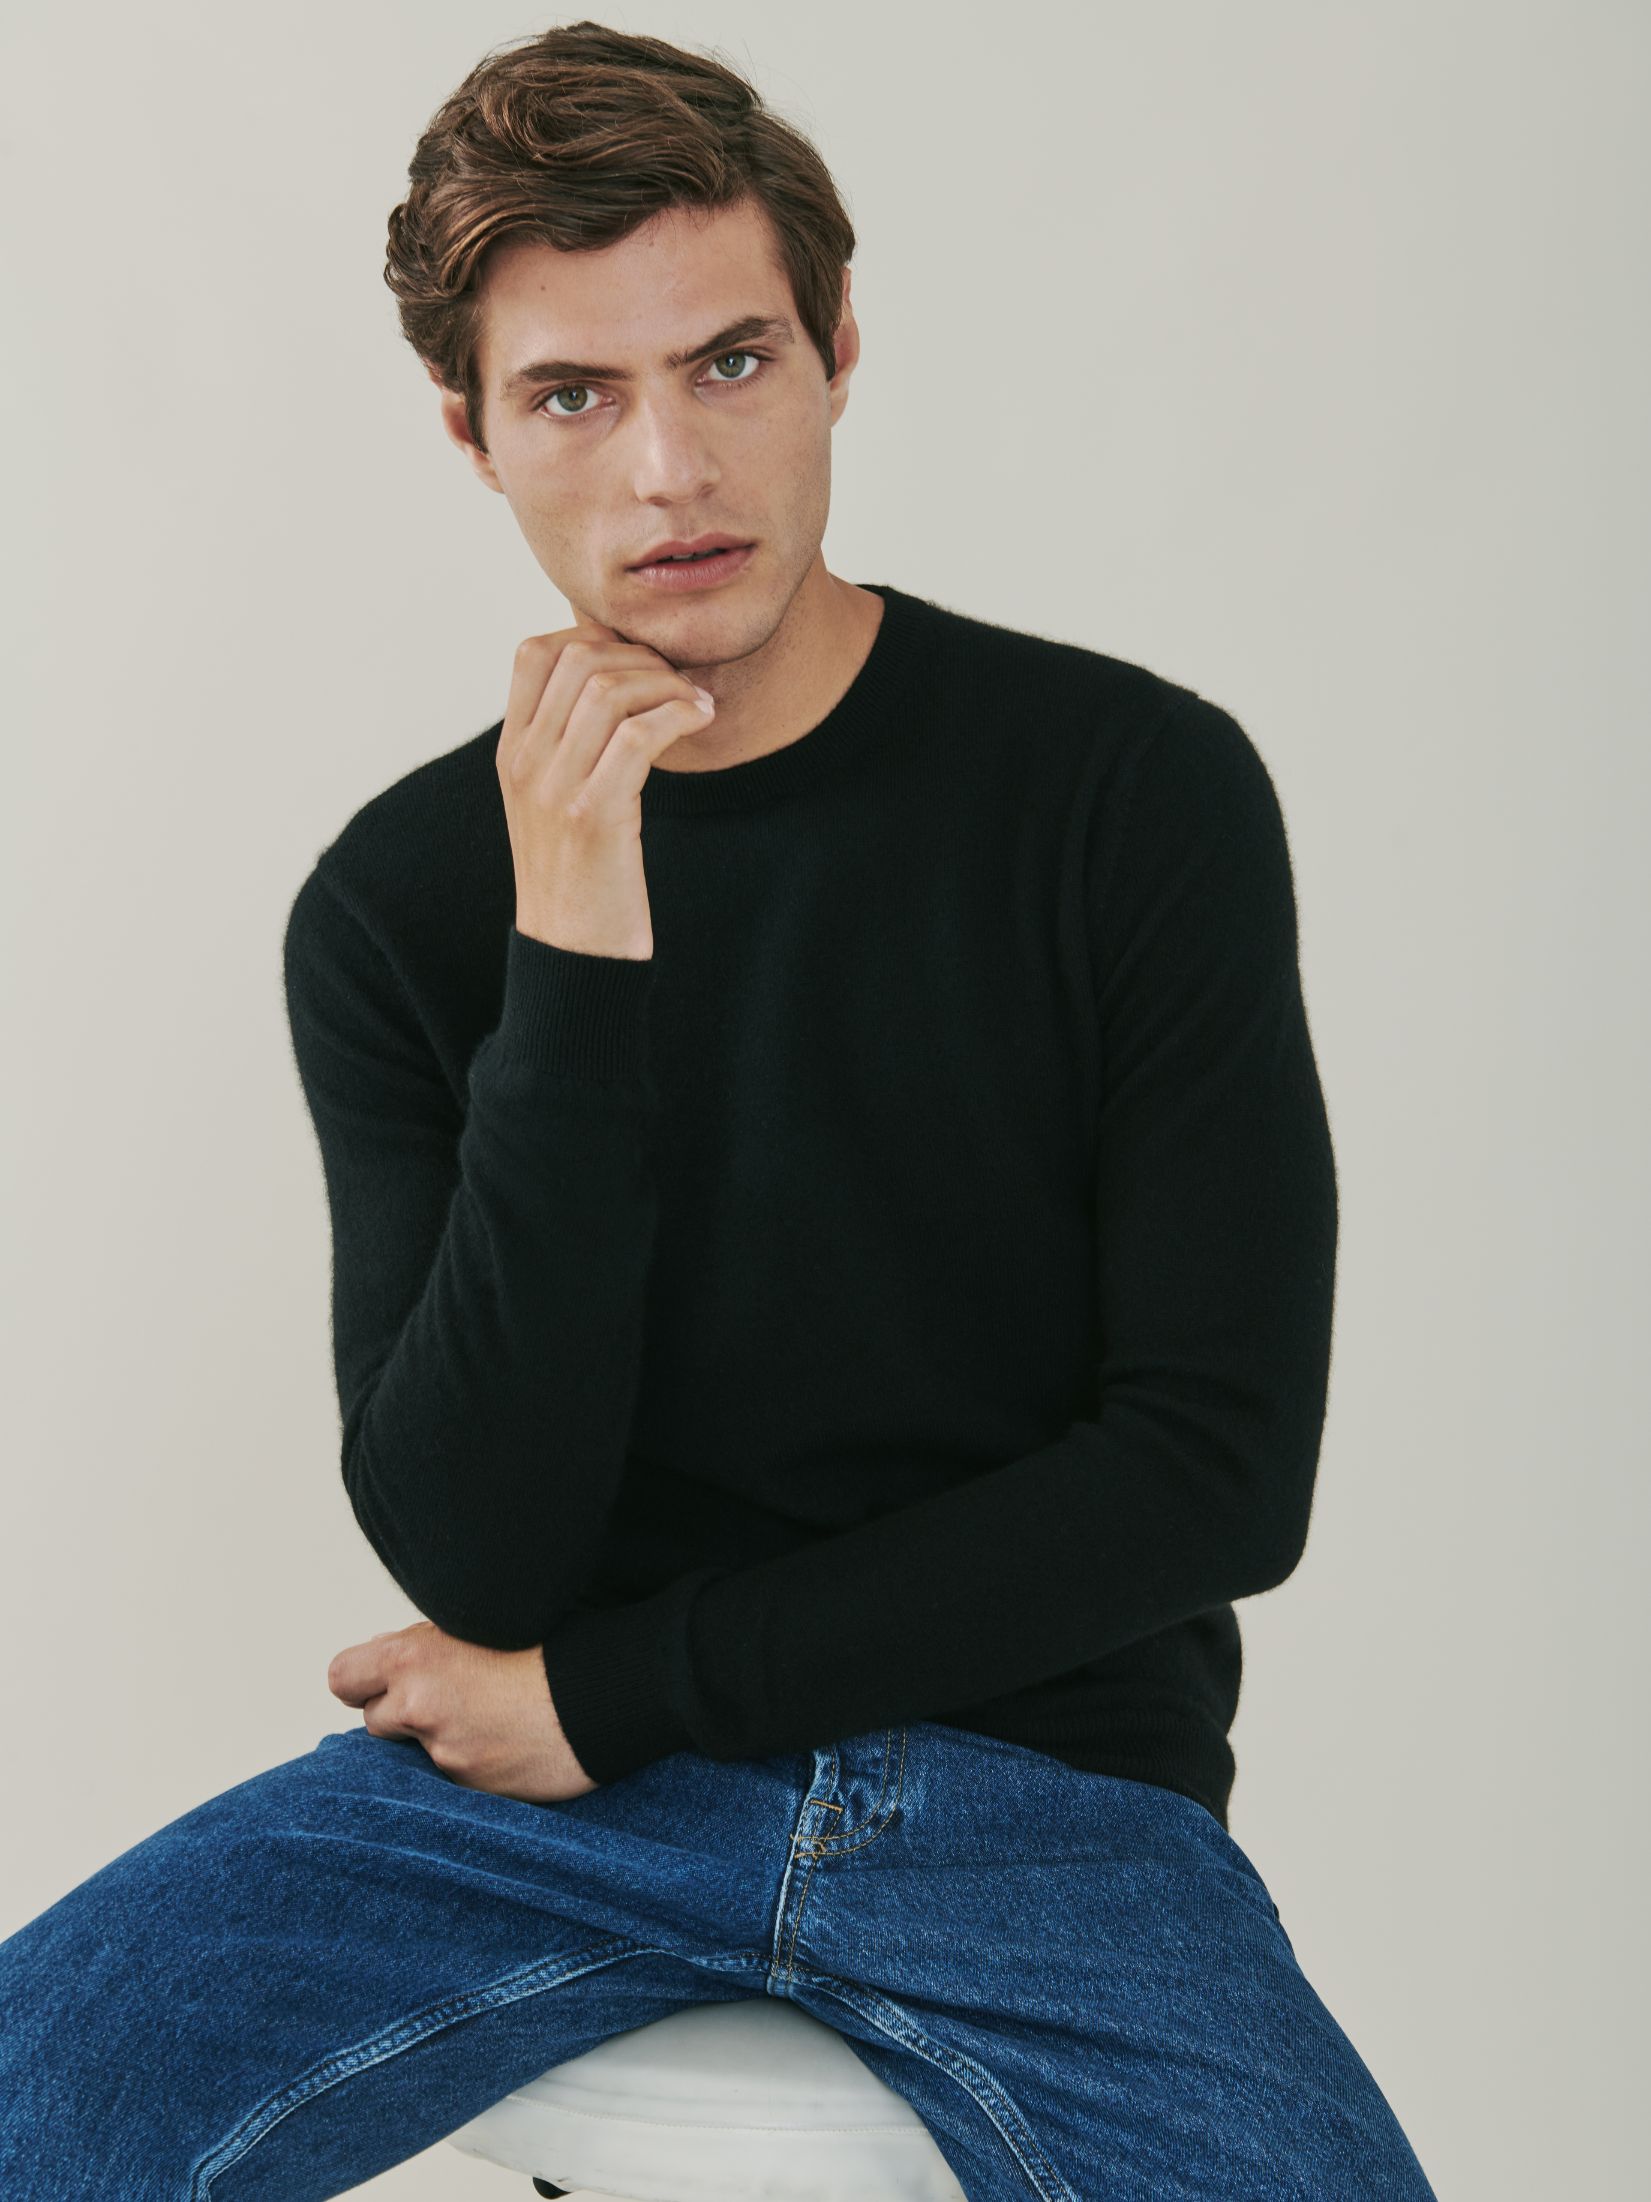 canyon-men-s-cashmere-crew-neck-sweater-in-black-mrquintessential